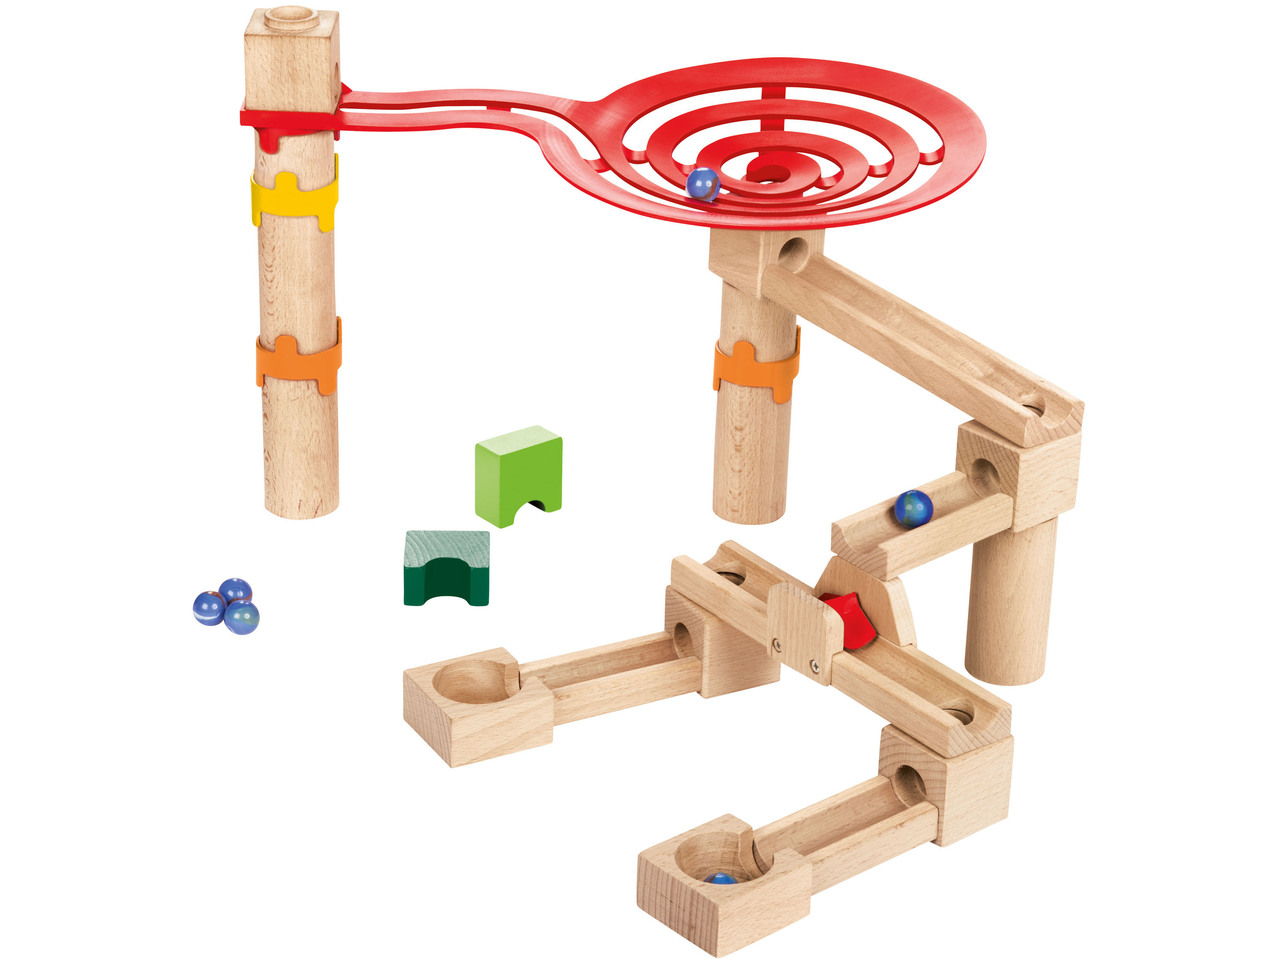 Marble Run, 29 or 35 pieces